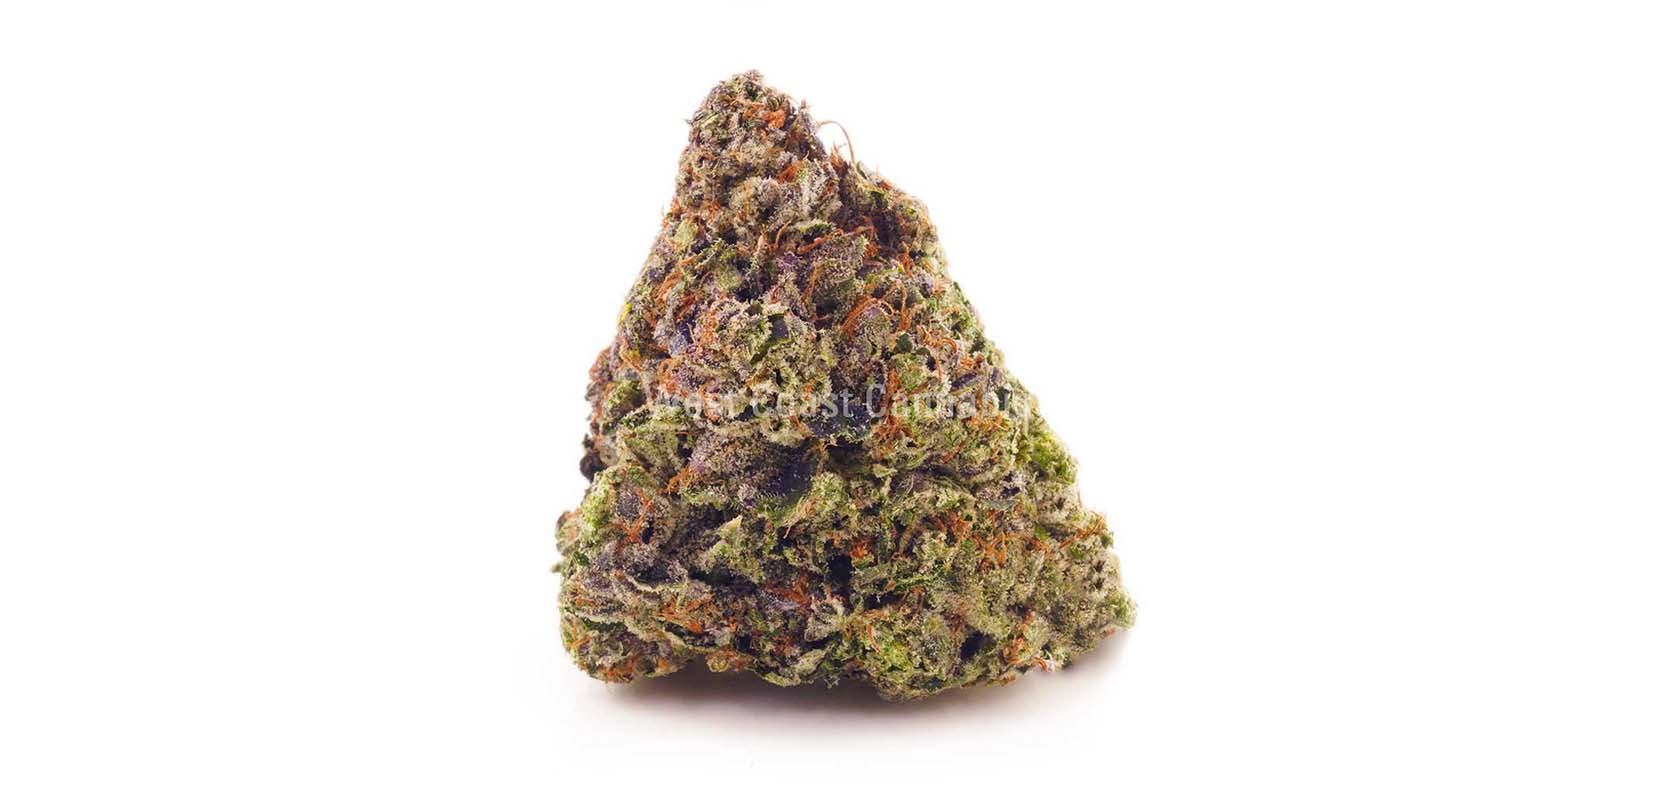 Layer Cake value buds from wccannabis for the cheapest deals on weed in Canada. Online dispensary Canada for mail order cannabis & dispensary weed.